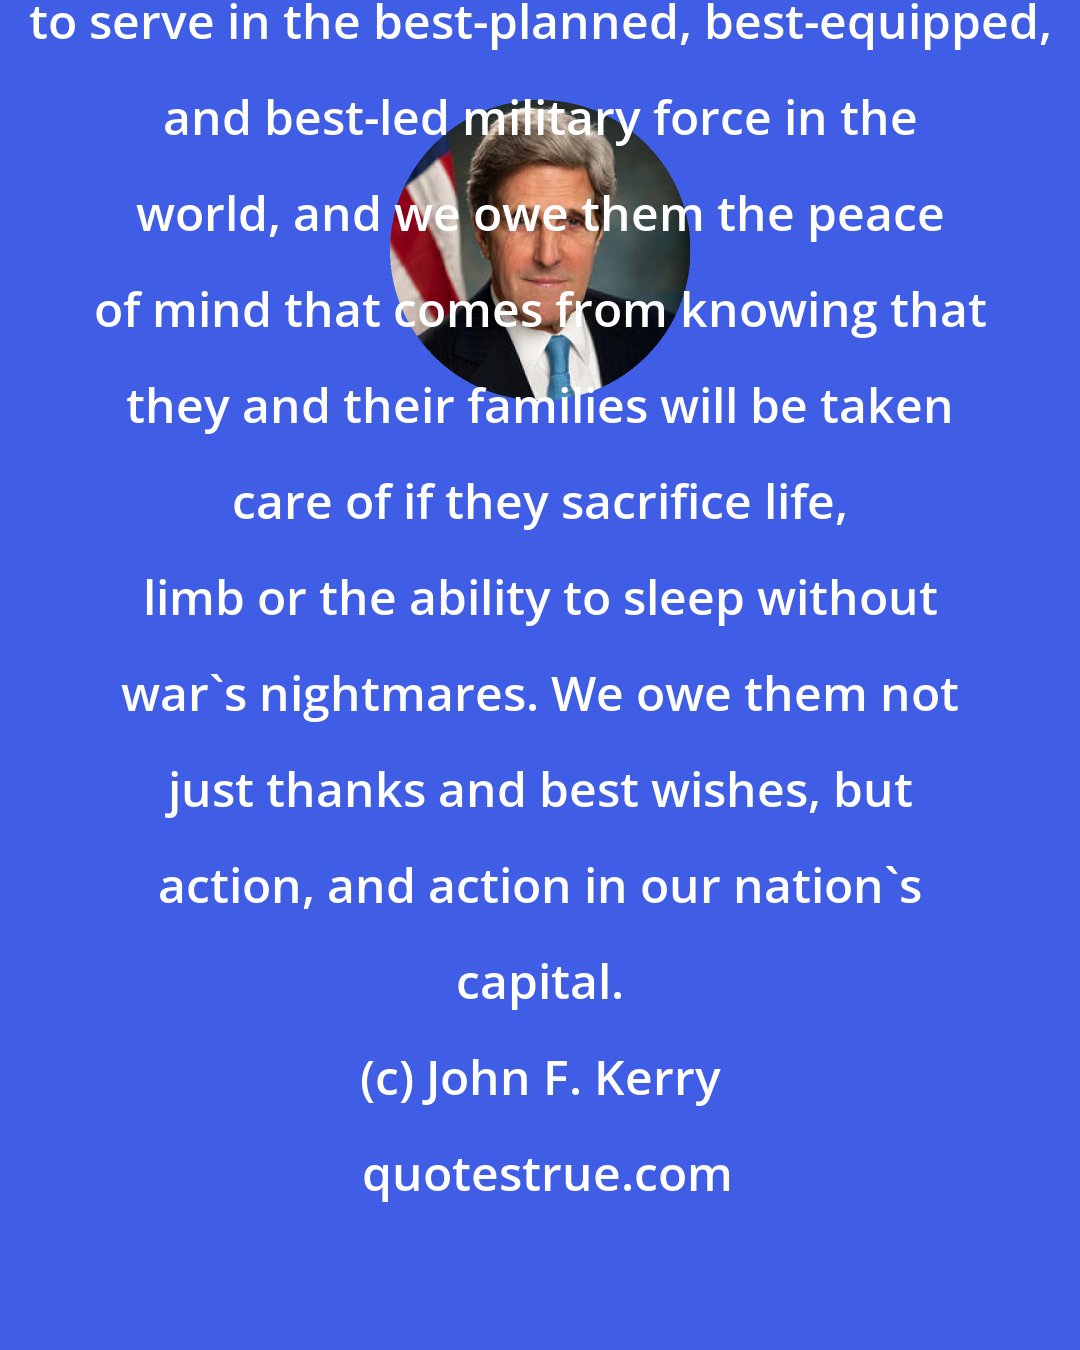 John F. Kerry: We owe our troops the opportunity to serve in the best-planned, best-equipped, and best-led military force in the world, and we owe them the peace of mind that comes from knowing that they and their families will be taken care of if they sacrifice life, limb or the ability to sleep without war's nightmares. We owe them not just thanks and best wishes, but action, and action in our nation's capital.